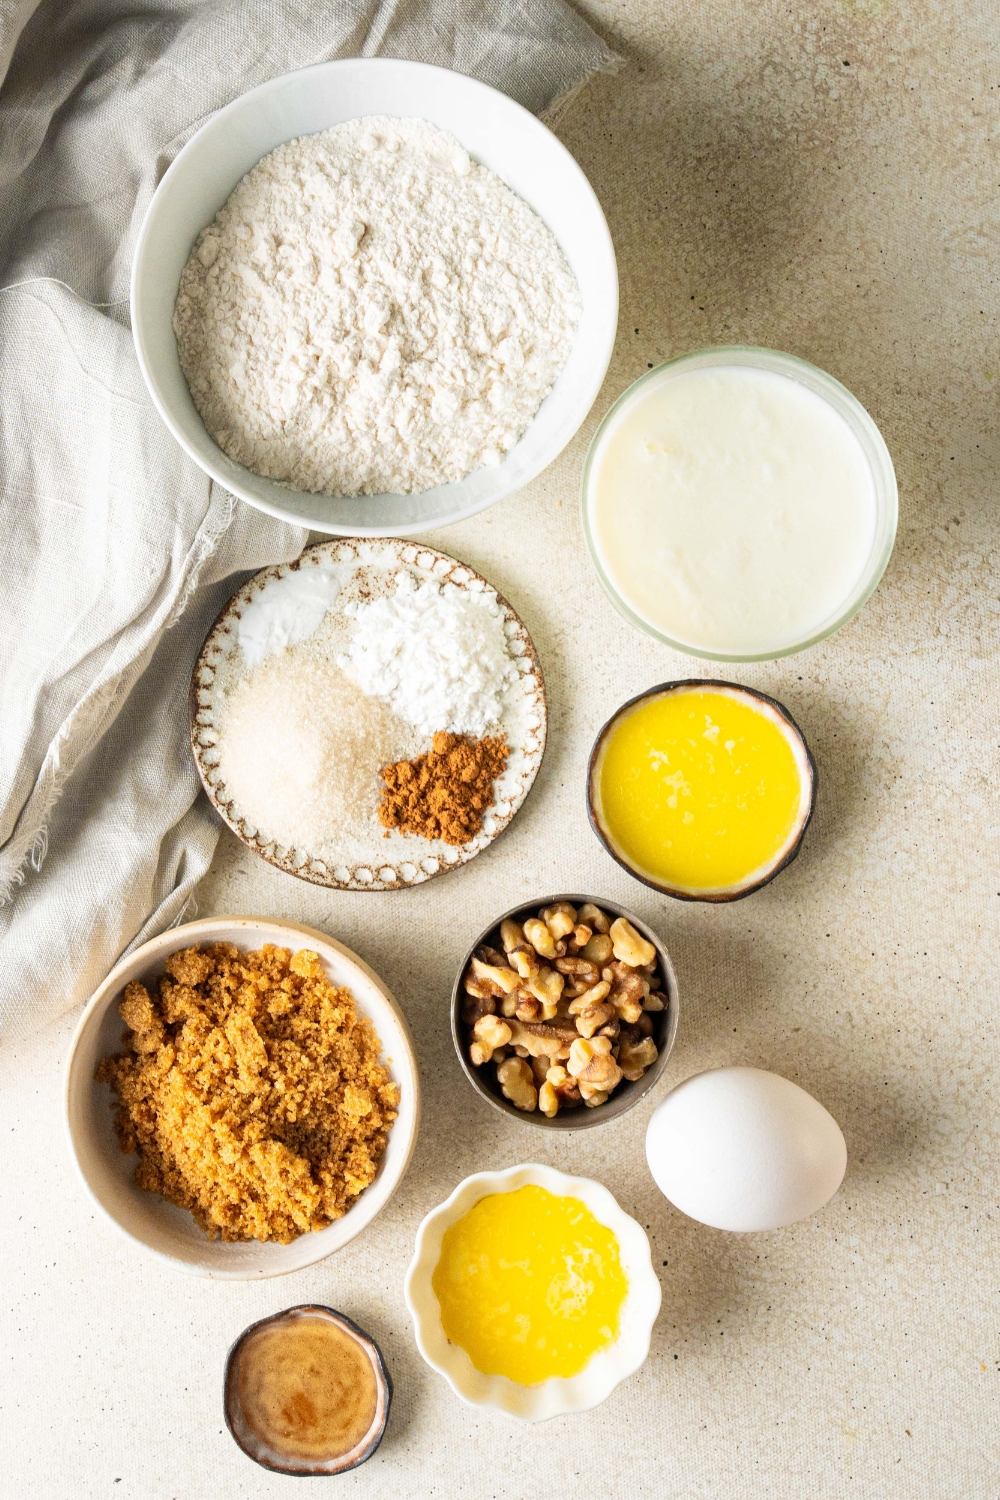 A countertop with multiple bowls with various ingredients like flour, sugar, cinnamon, baking powder, baking soda, melted butter, chopped walnuts, brown sugar, rum, buttermilk, and an egg.